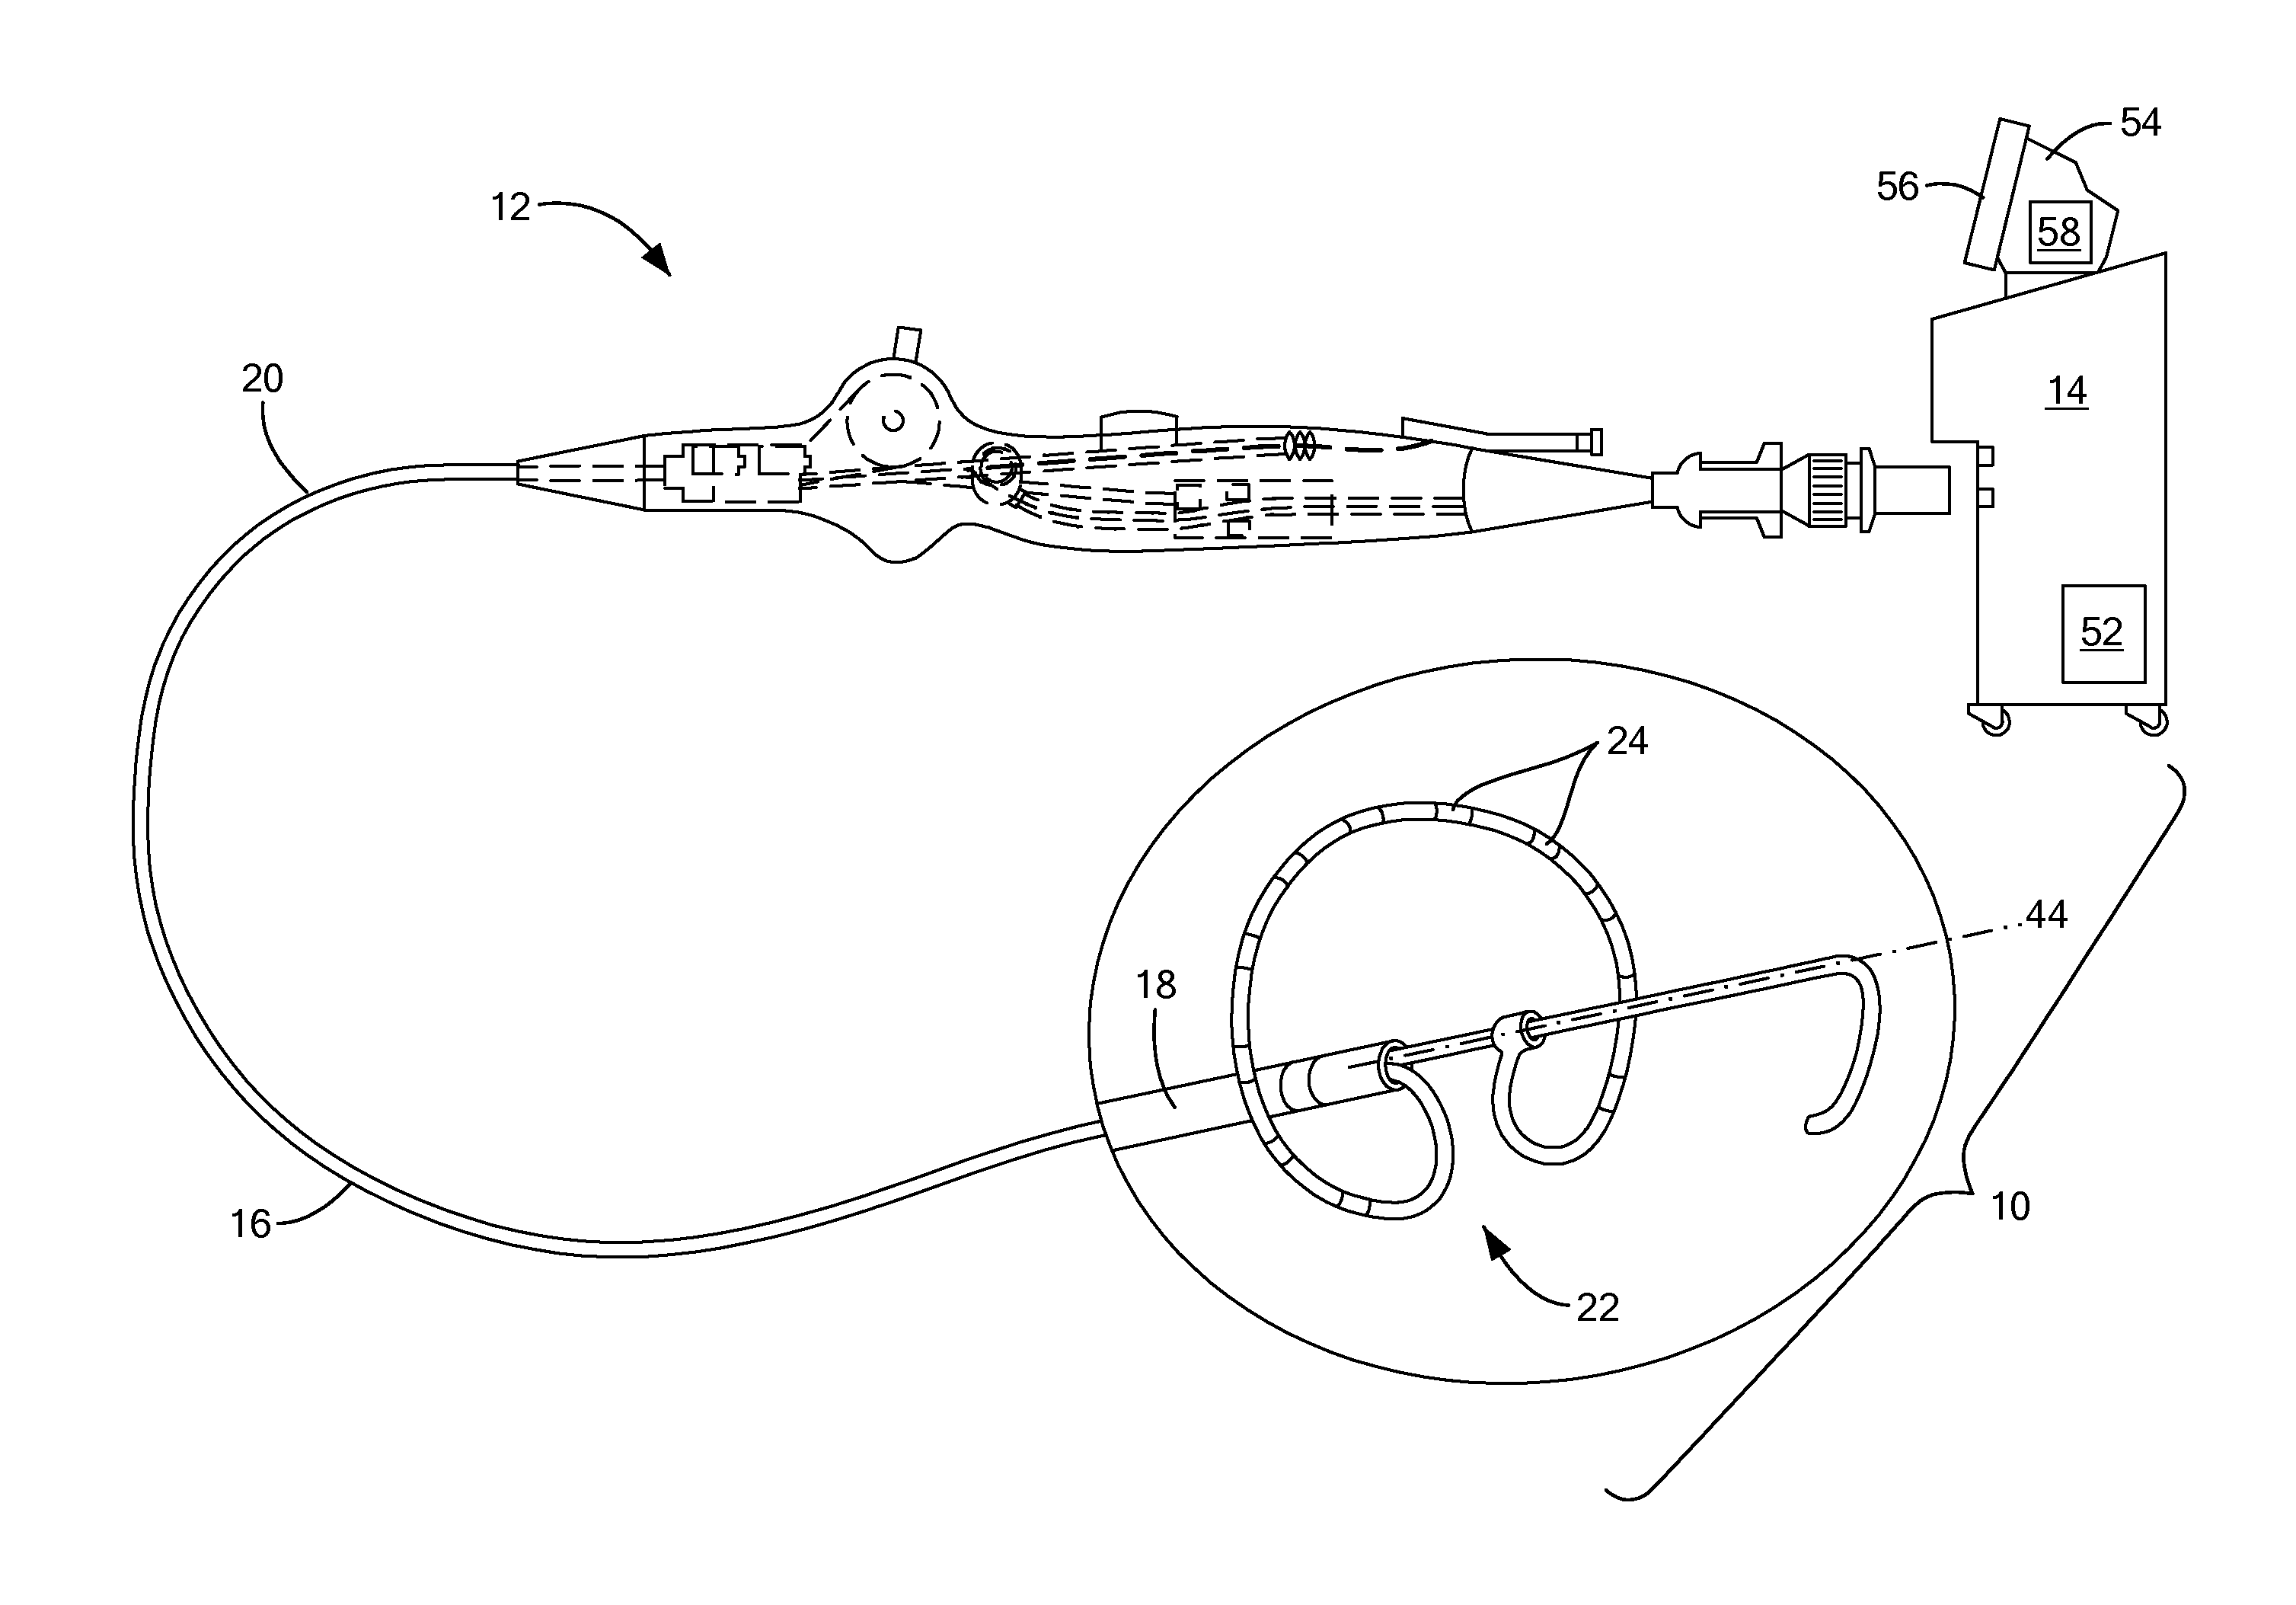 Tissue contact sensing with a multi electrode ablation catheter